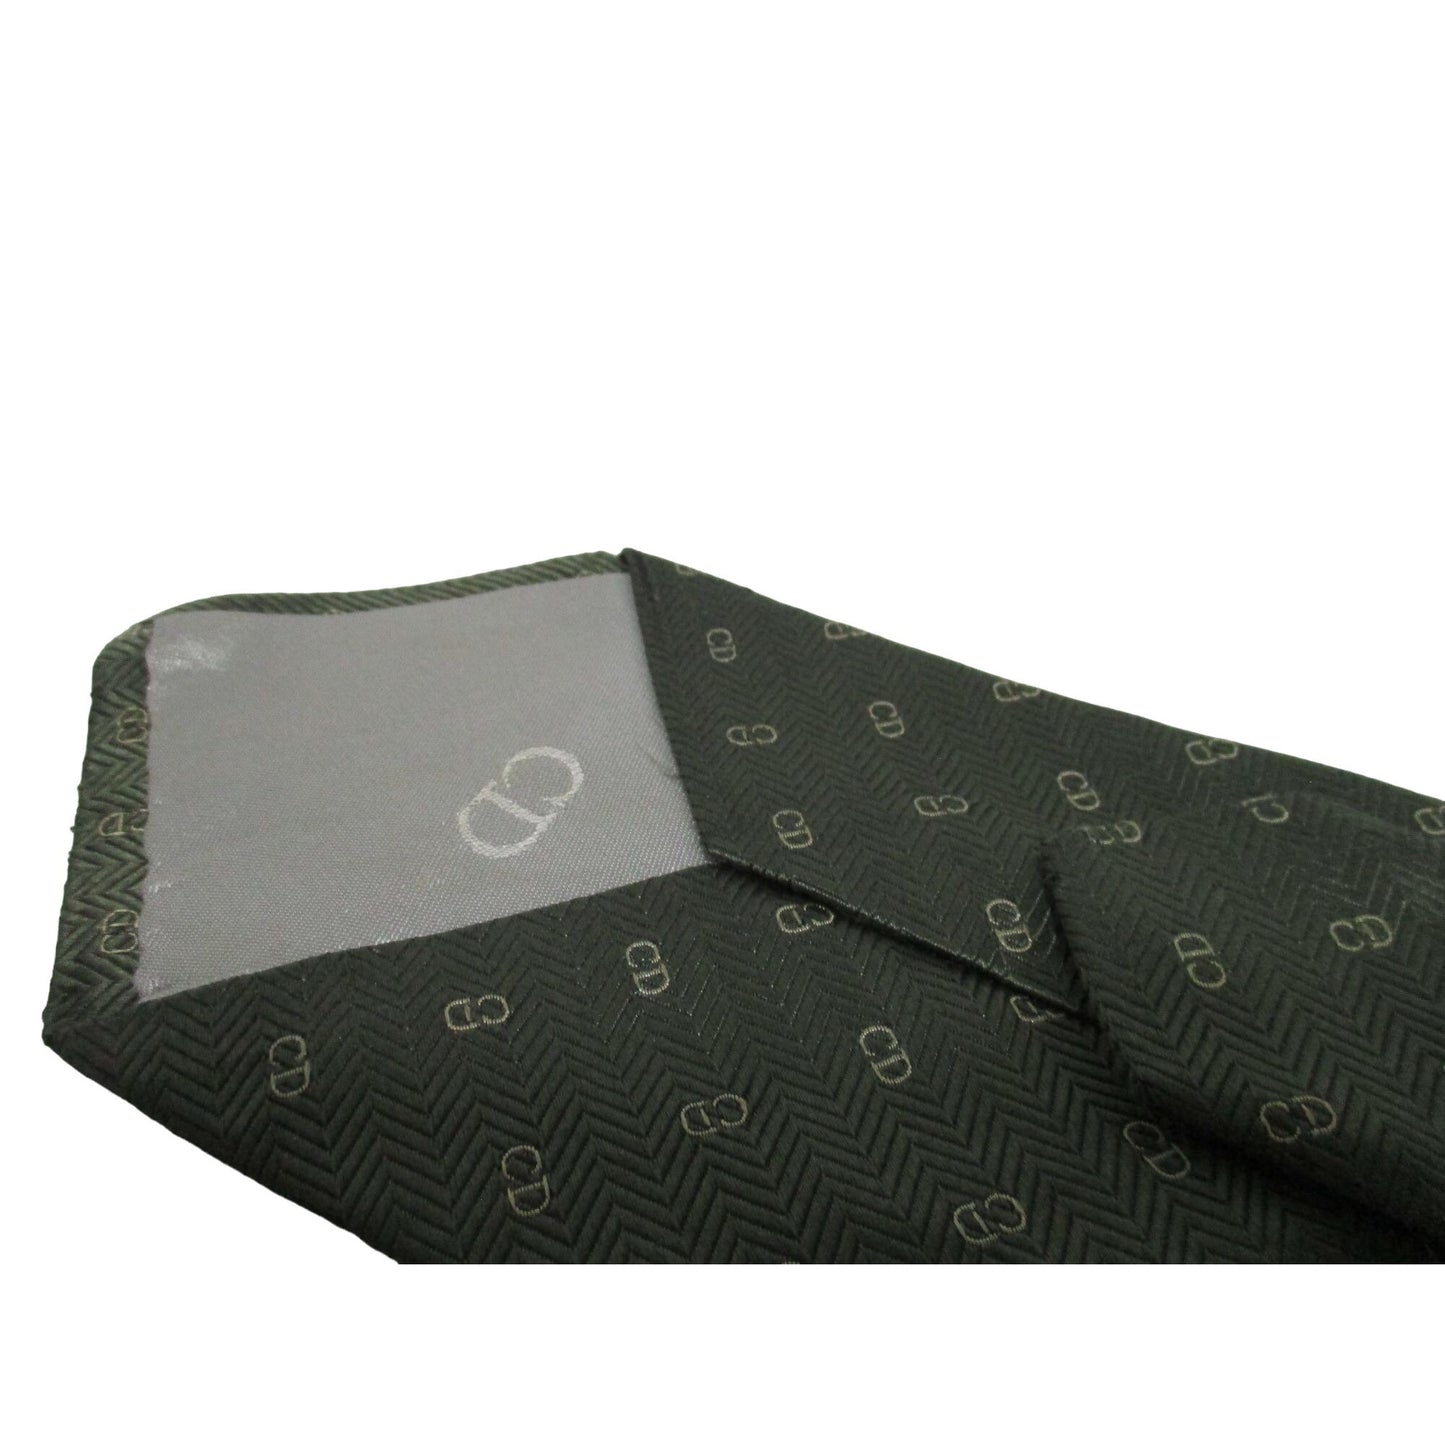 Vintage Christian Dior tie made of 100% textured, olive green silk with a logo print in shades of tan